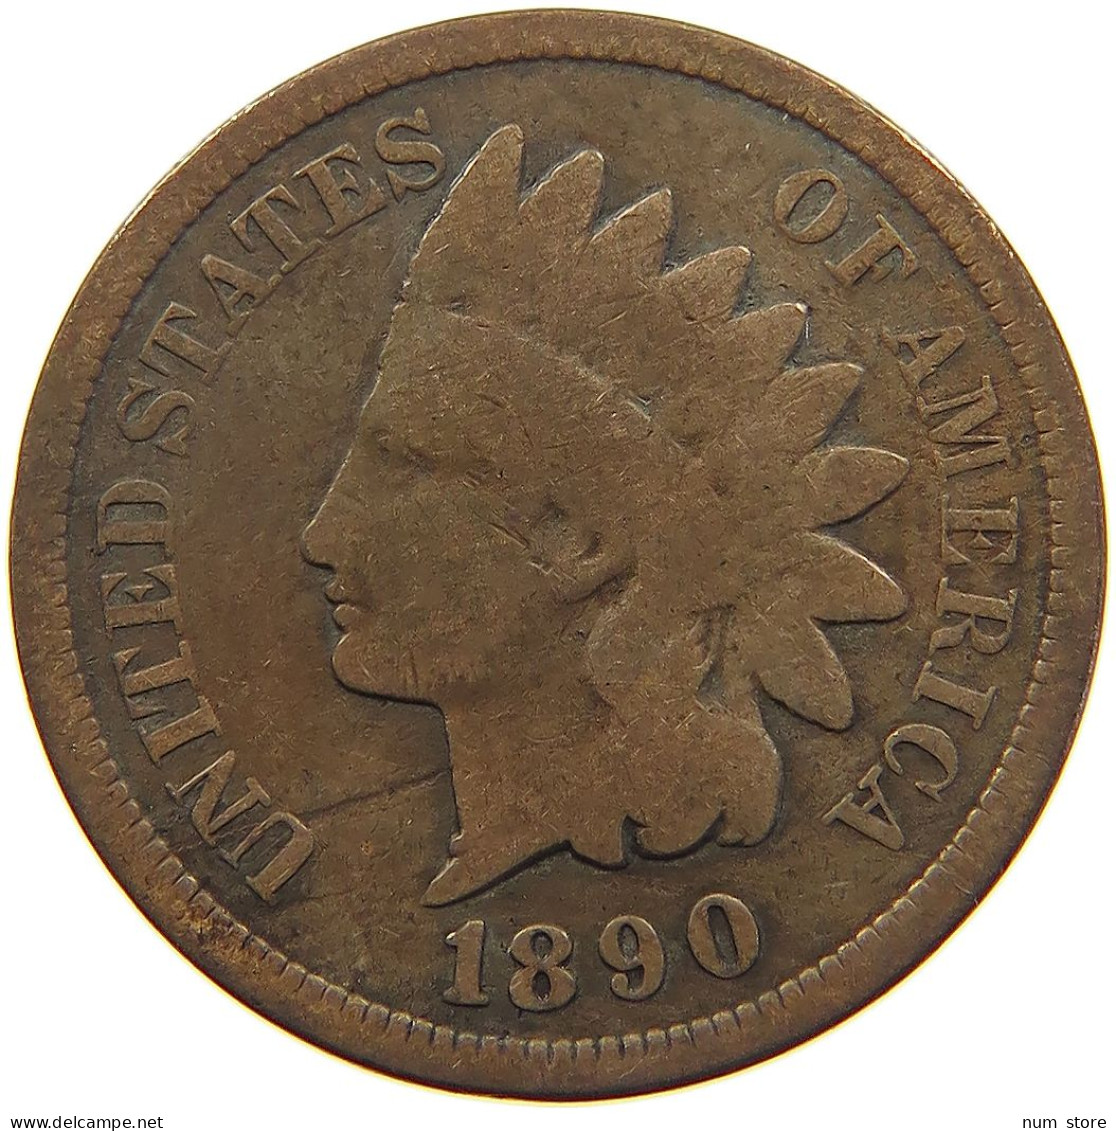 UNITED STATES OF AMERICA CENT 1890 INDIAN HEAD #a050 0487 - 1859-1909: Indian Head